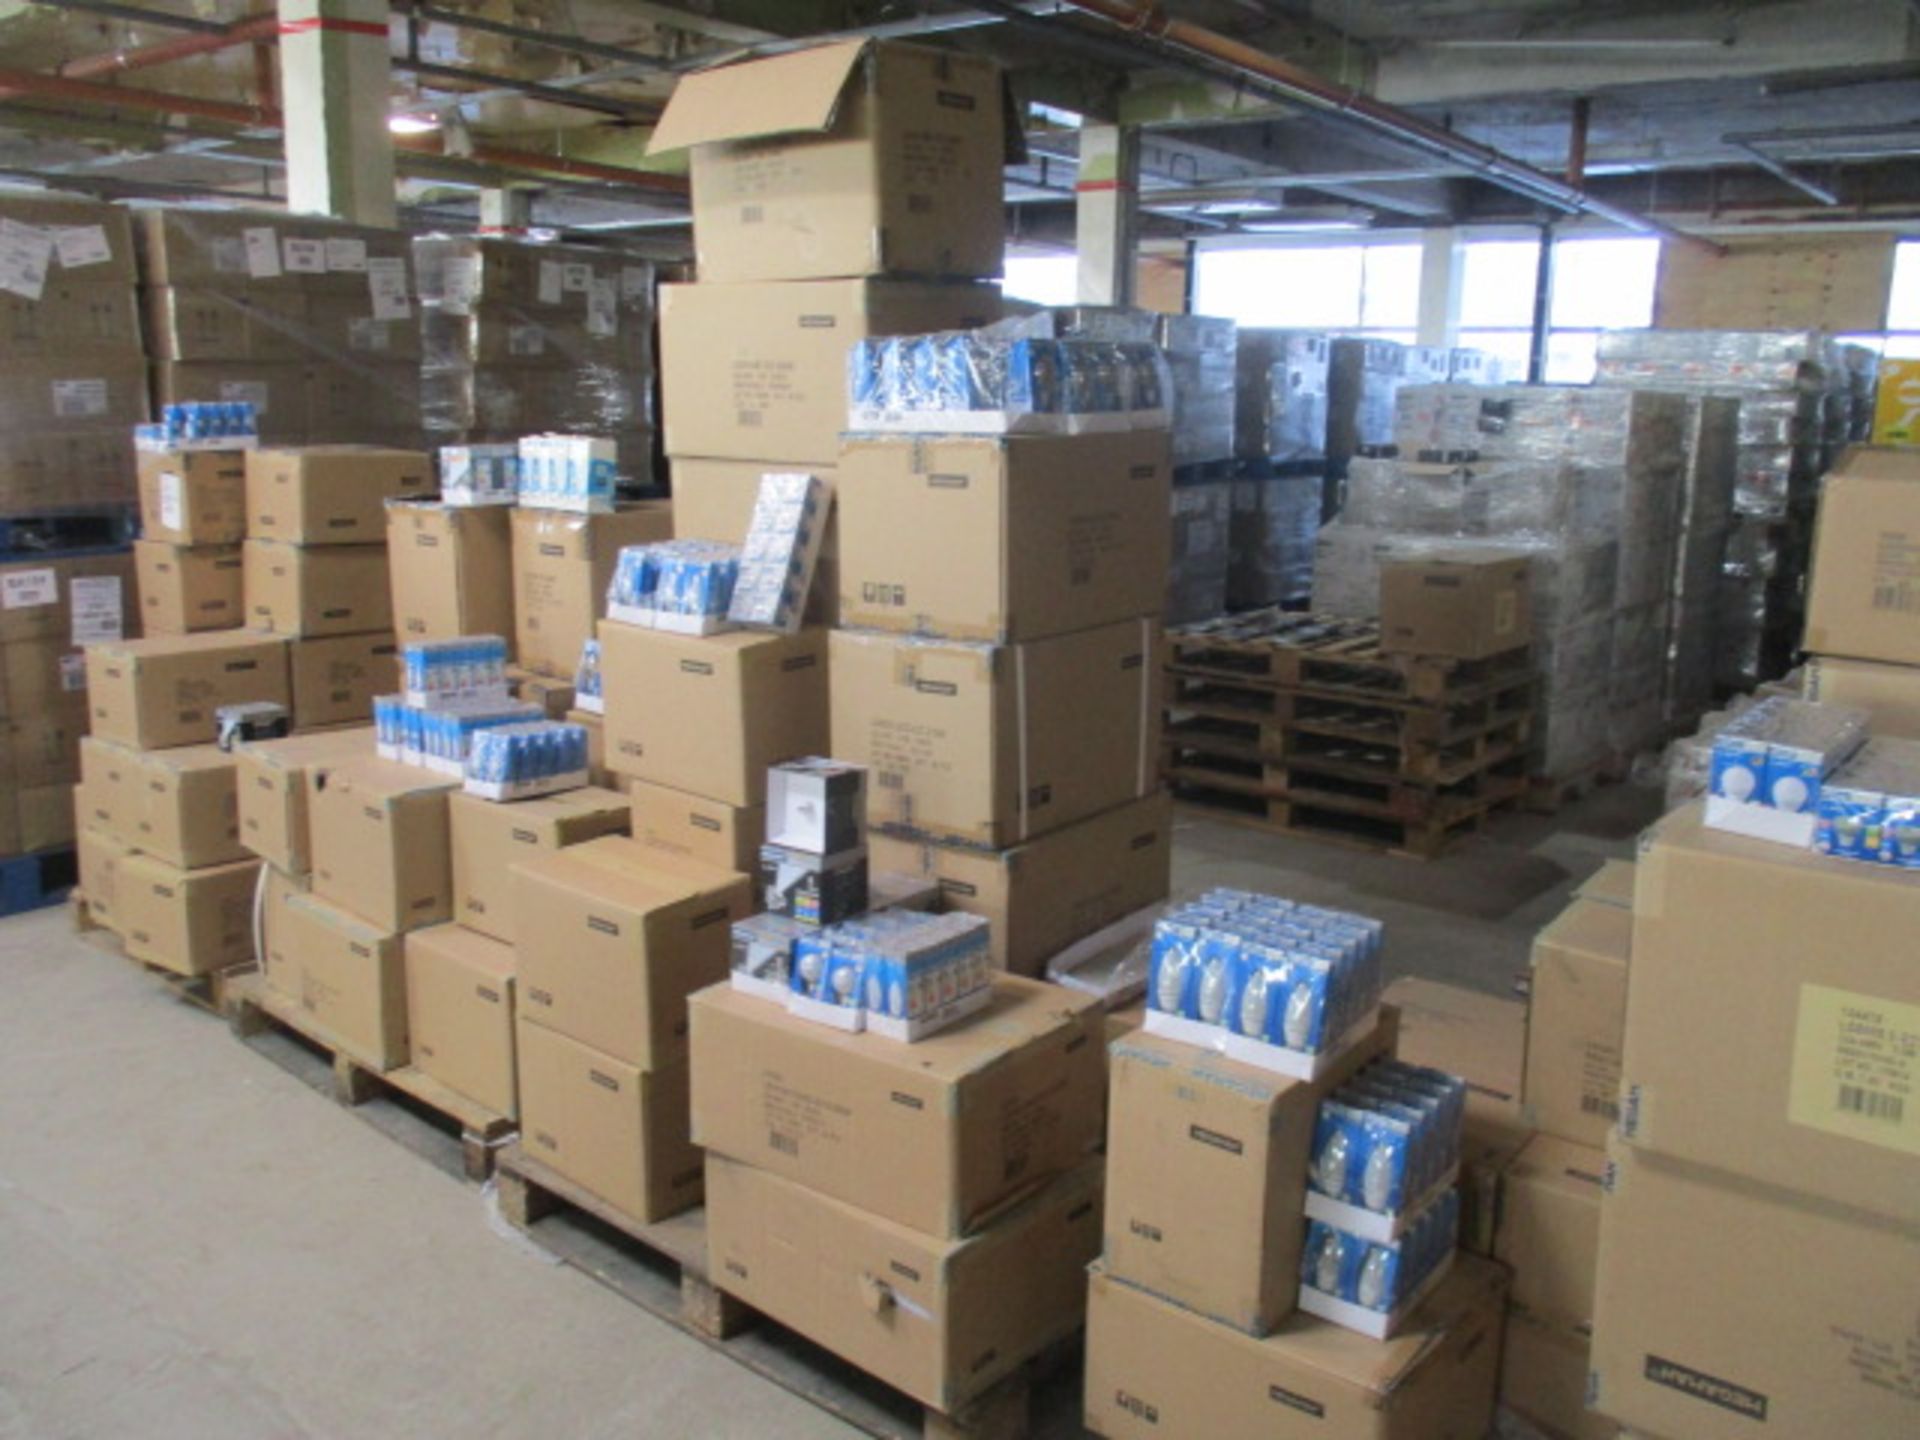 Approx. 10,000 Brand New Megaman LED Bulbs | Approx RRP £50,000+ - Image 28 of 30